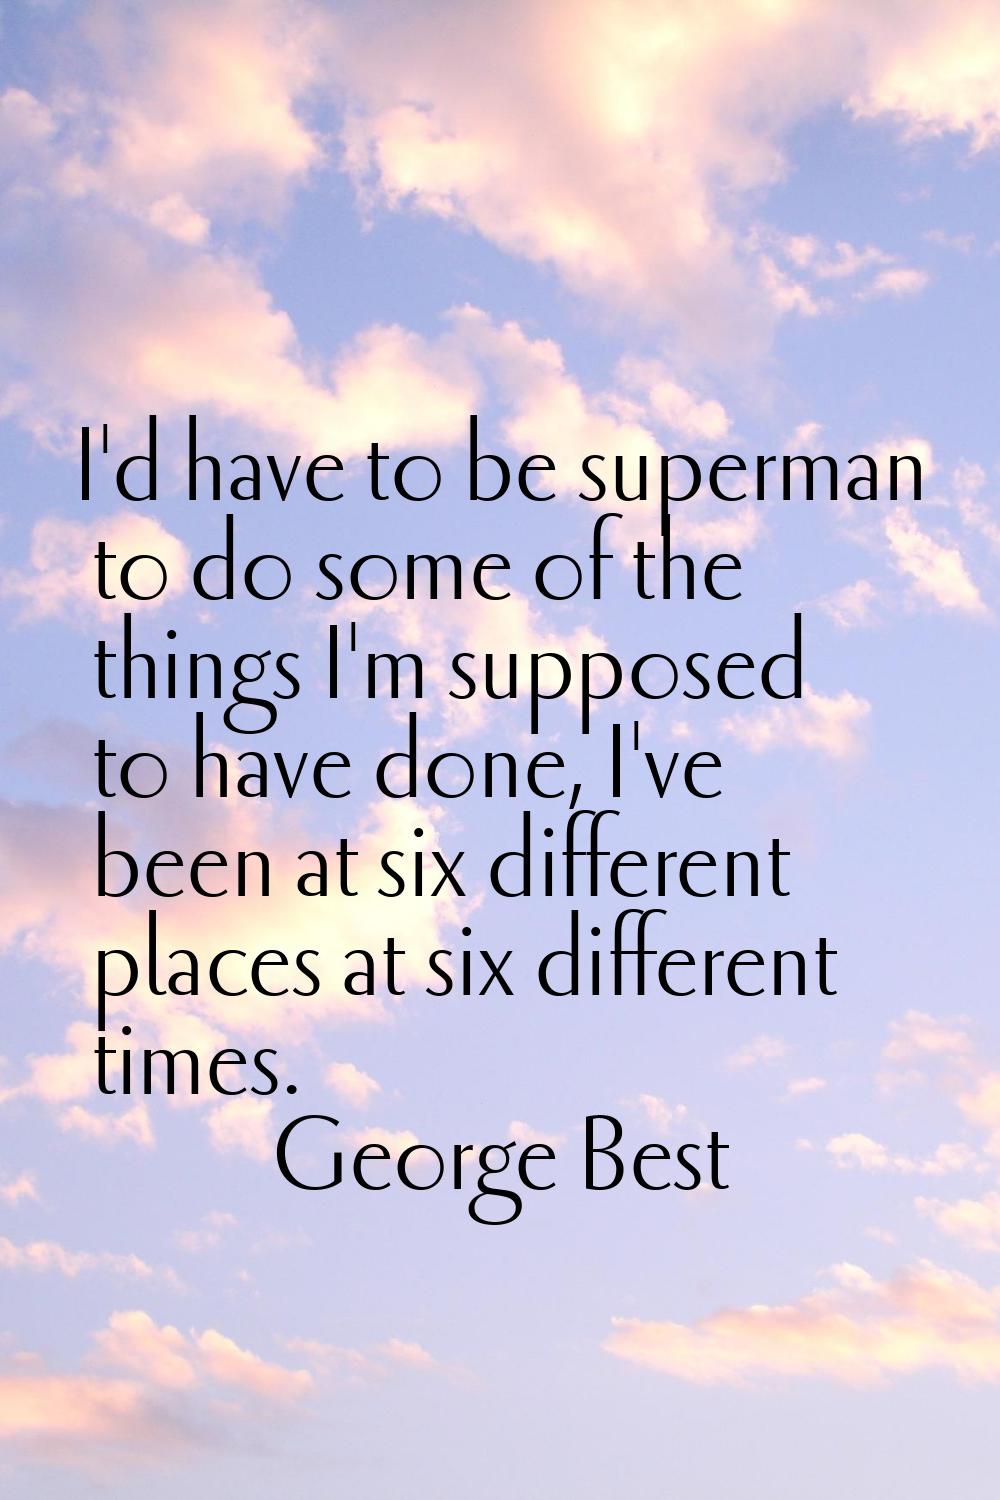 I'd have to be superman to do some of the things I'm supposed to have done, I've been at six differ